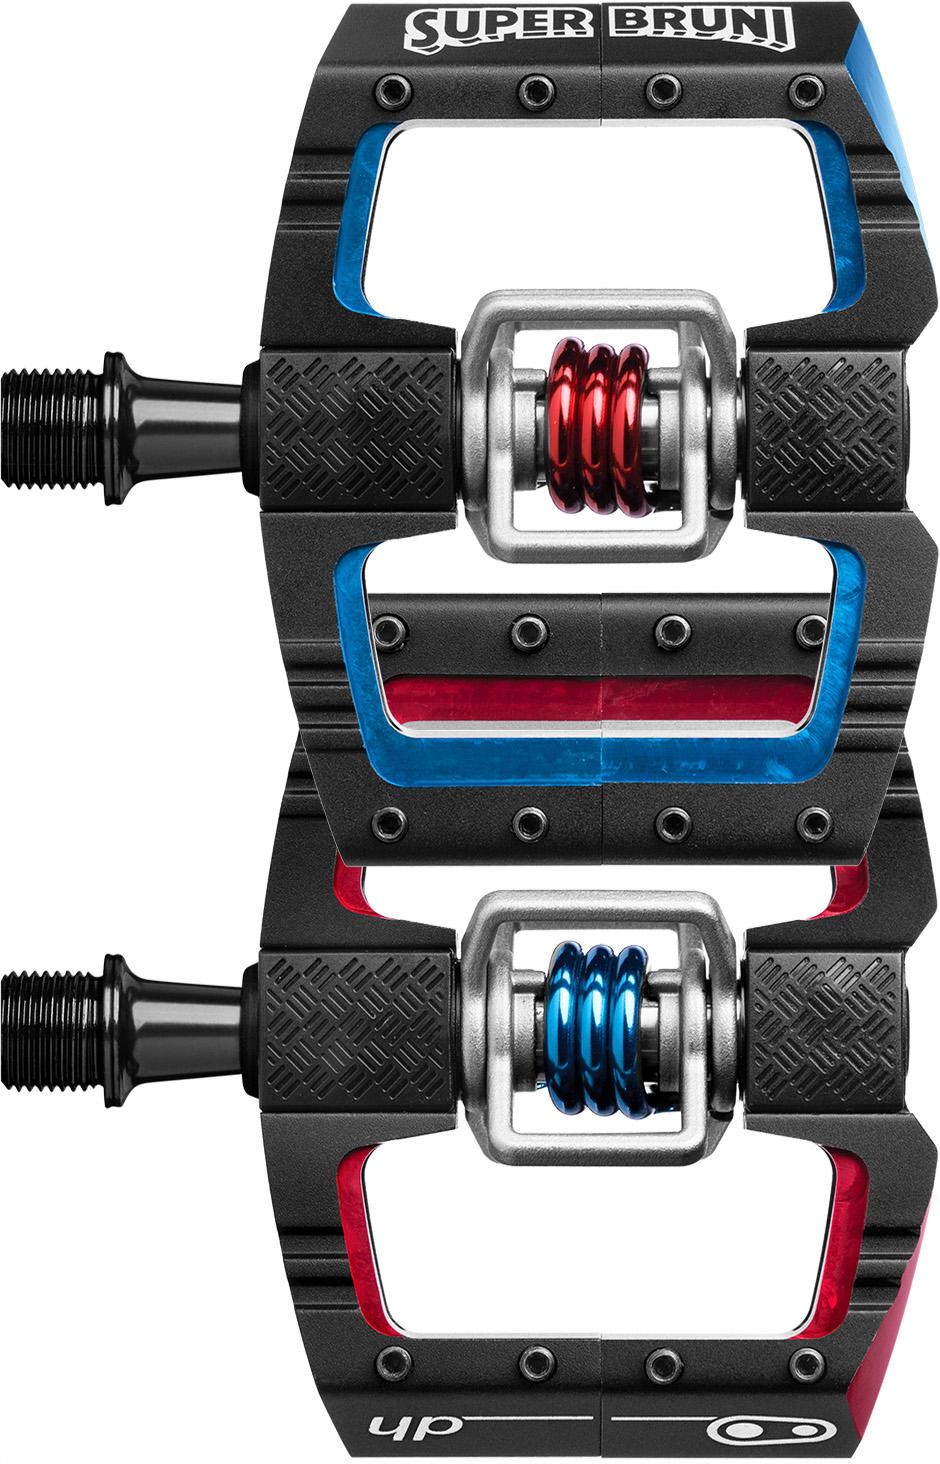 Crankbrothers Mallet Dh Loic Bruni Edition Pedals - Black/blue/red